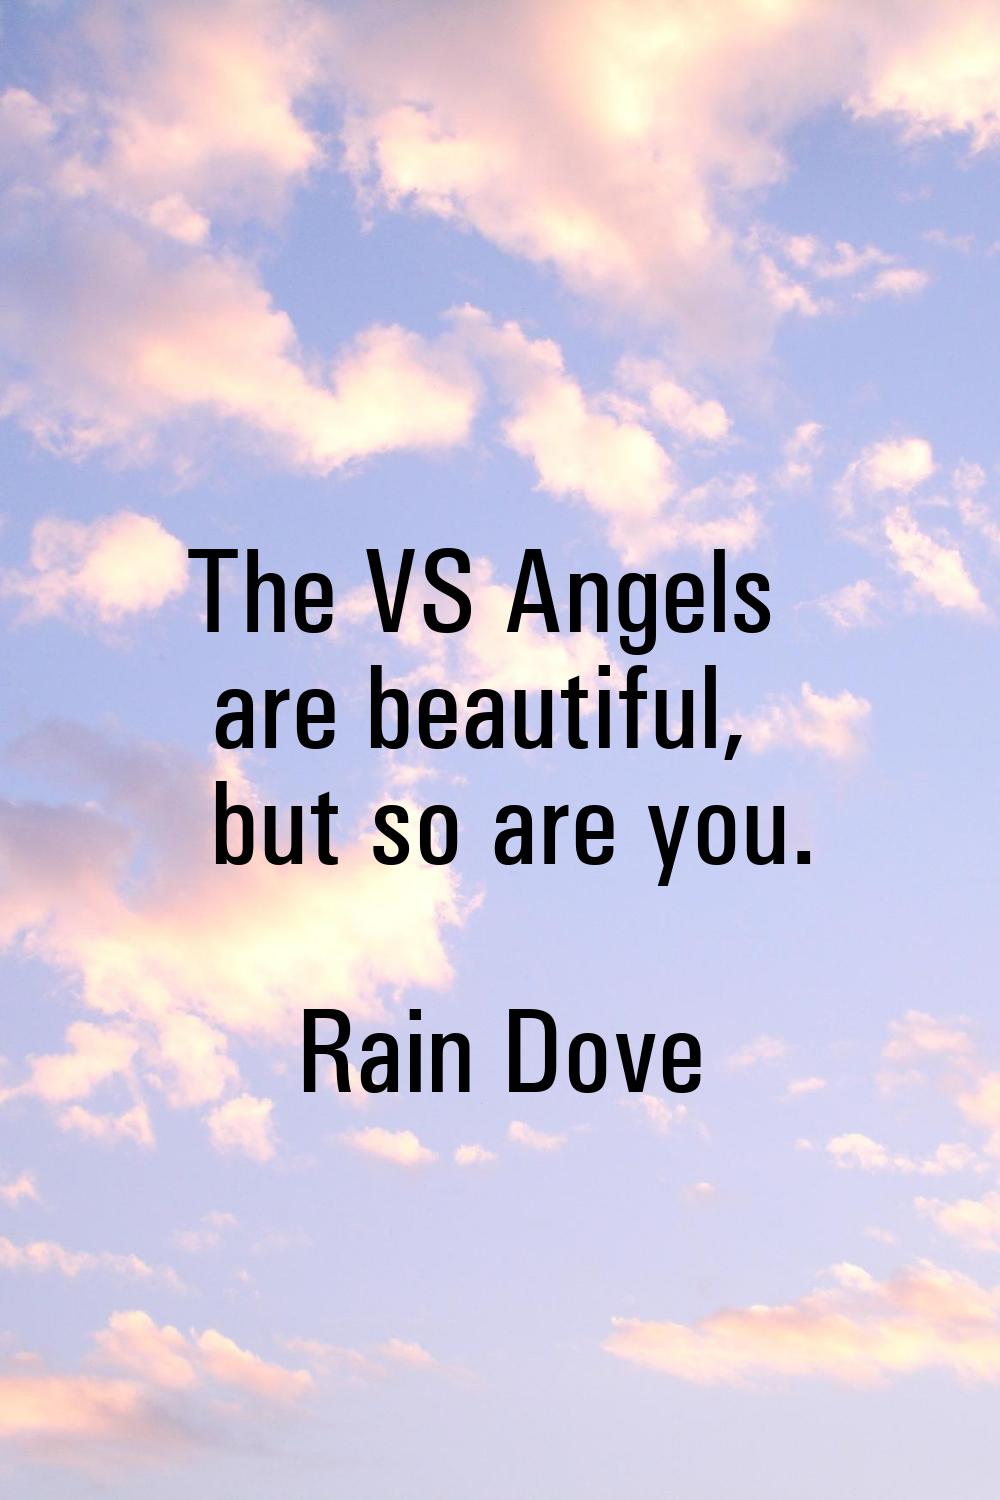 The VS Angels are beautiful, but so are you.